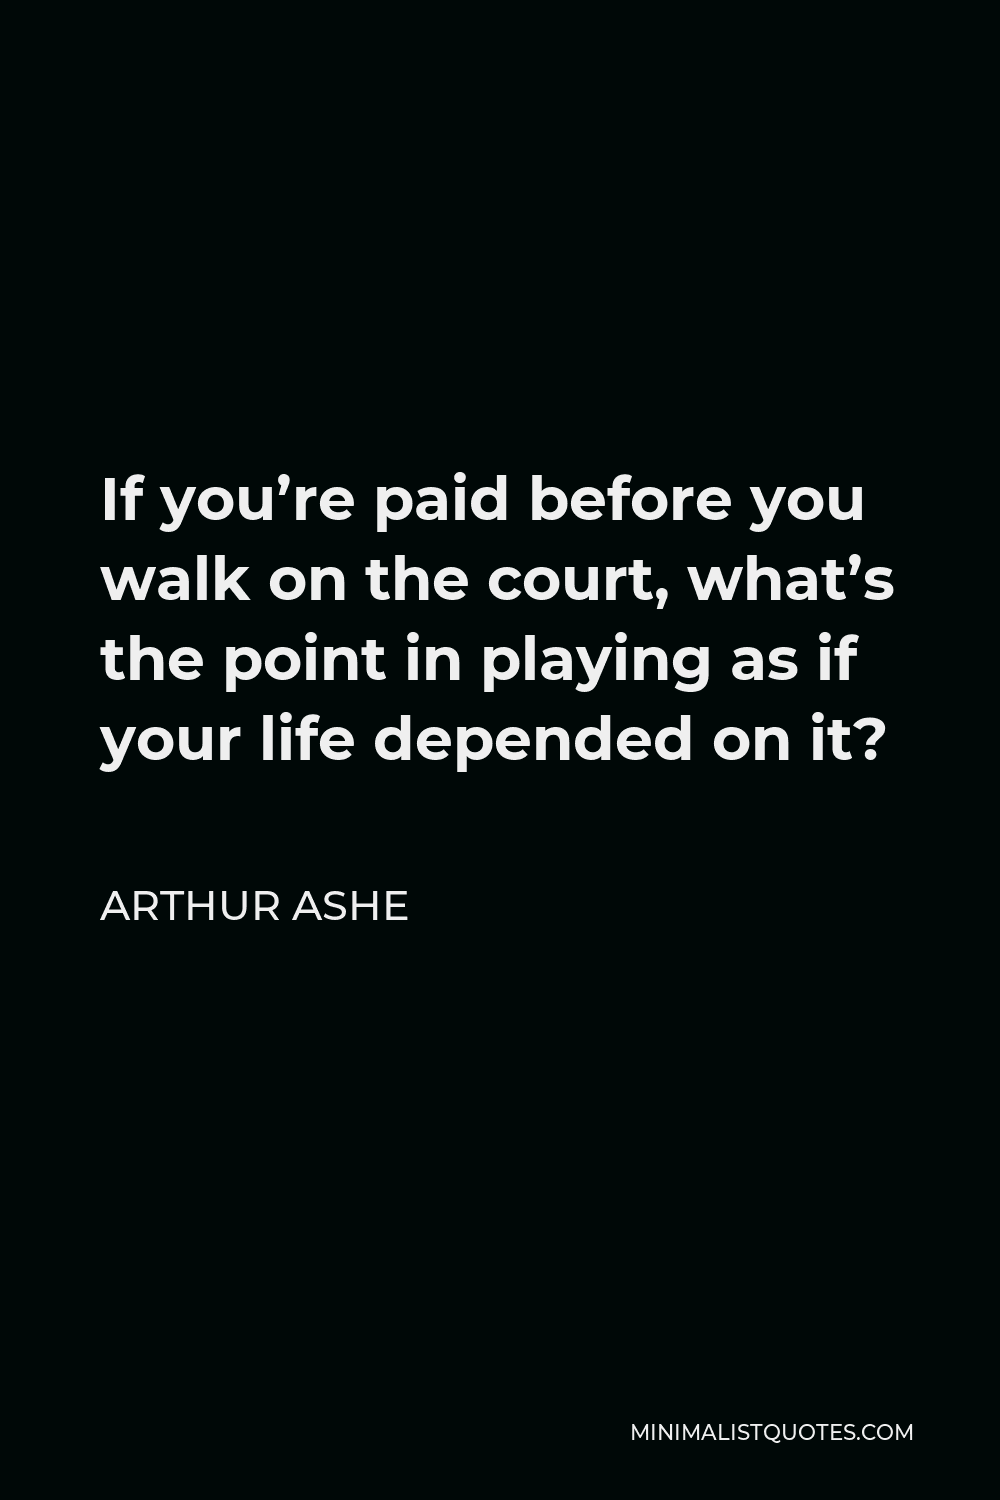 Arthur Ashe Quote - If you’re paid before you walk on the court, what’s the point in playing as if your life depended on it?